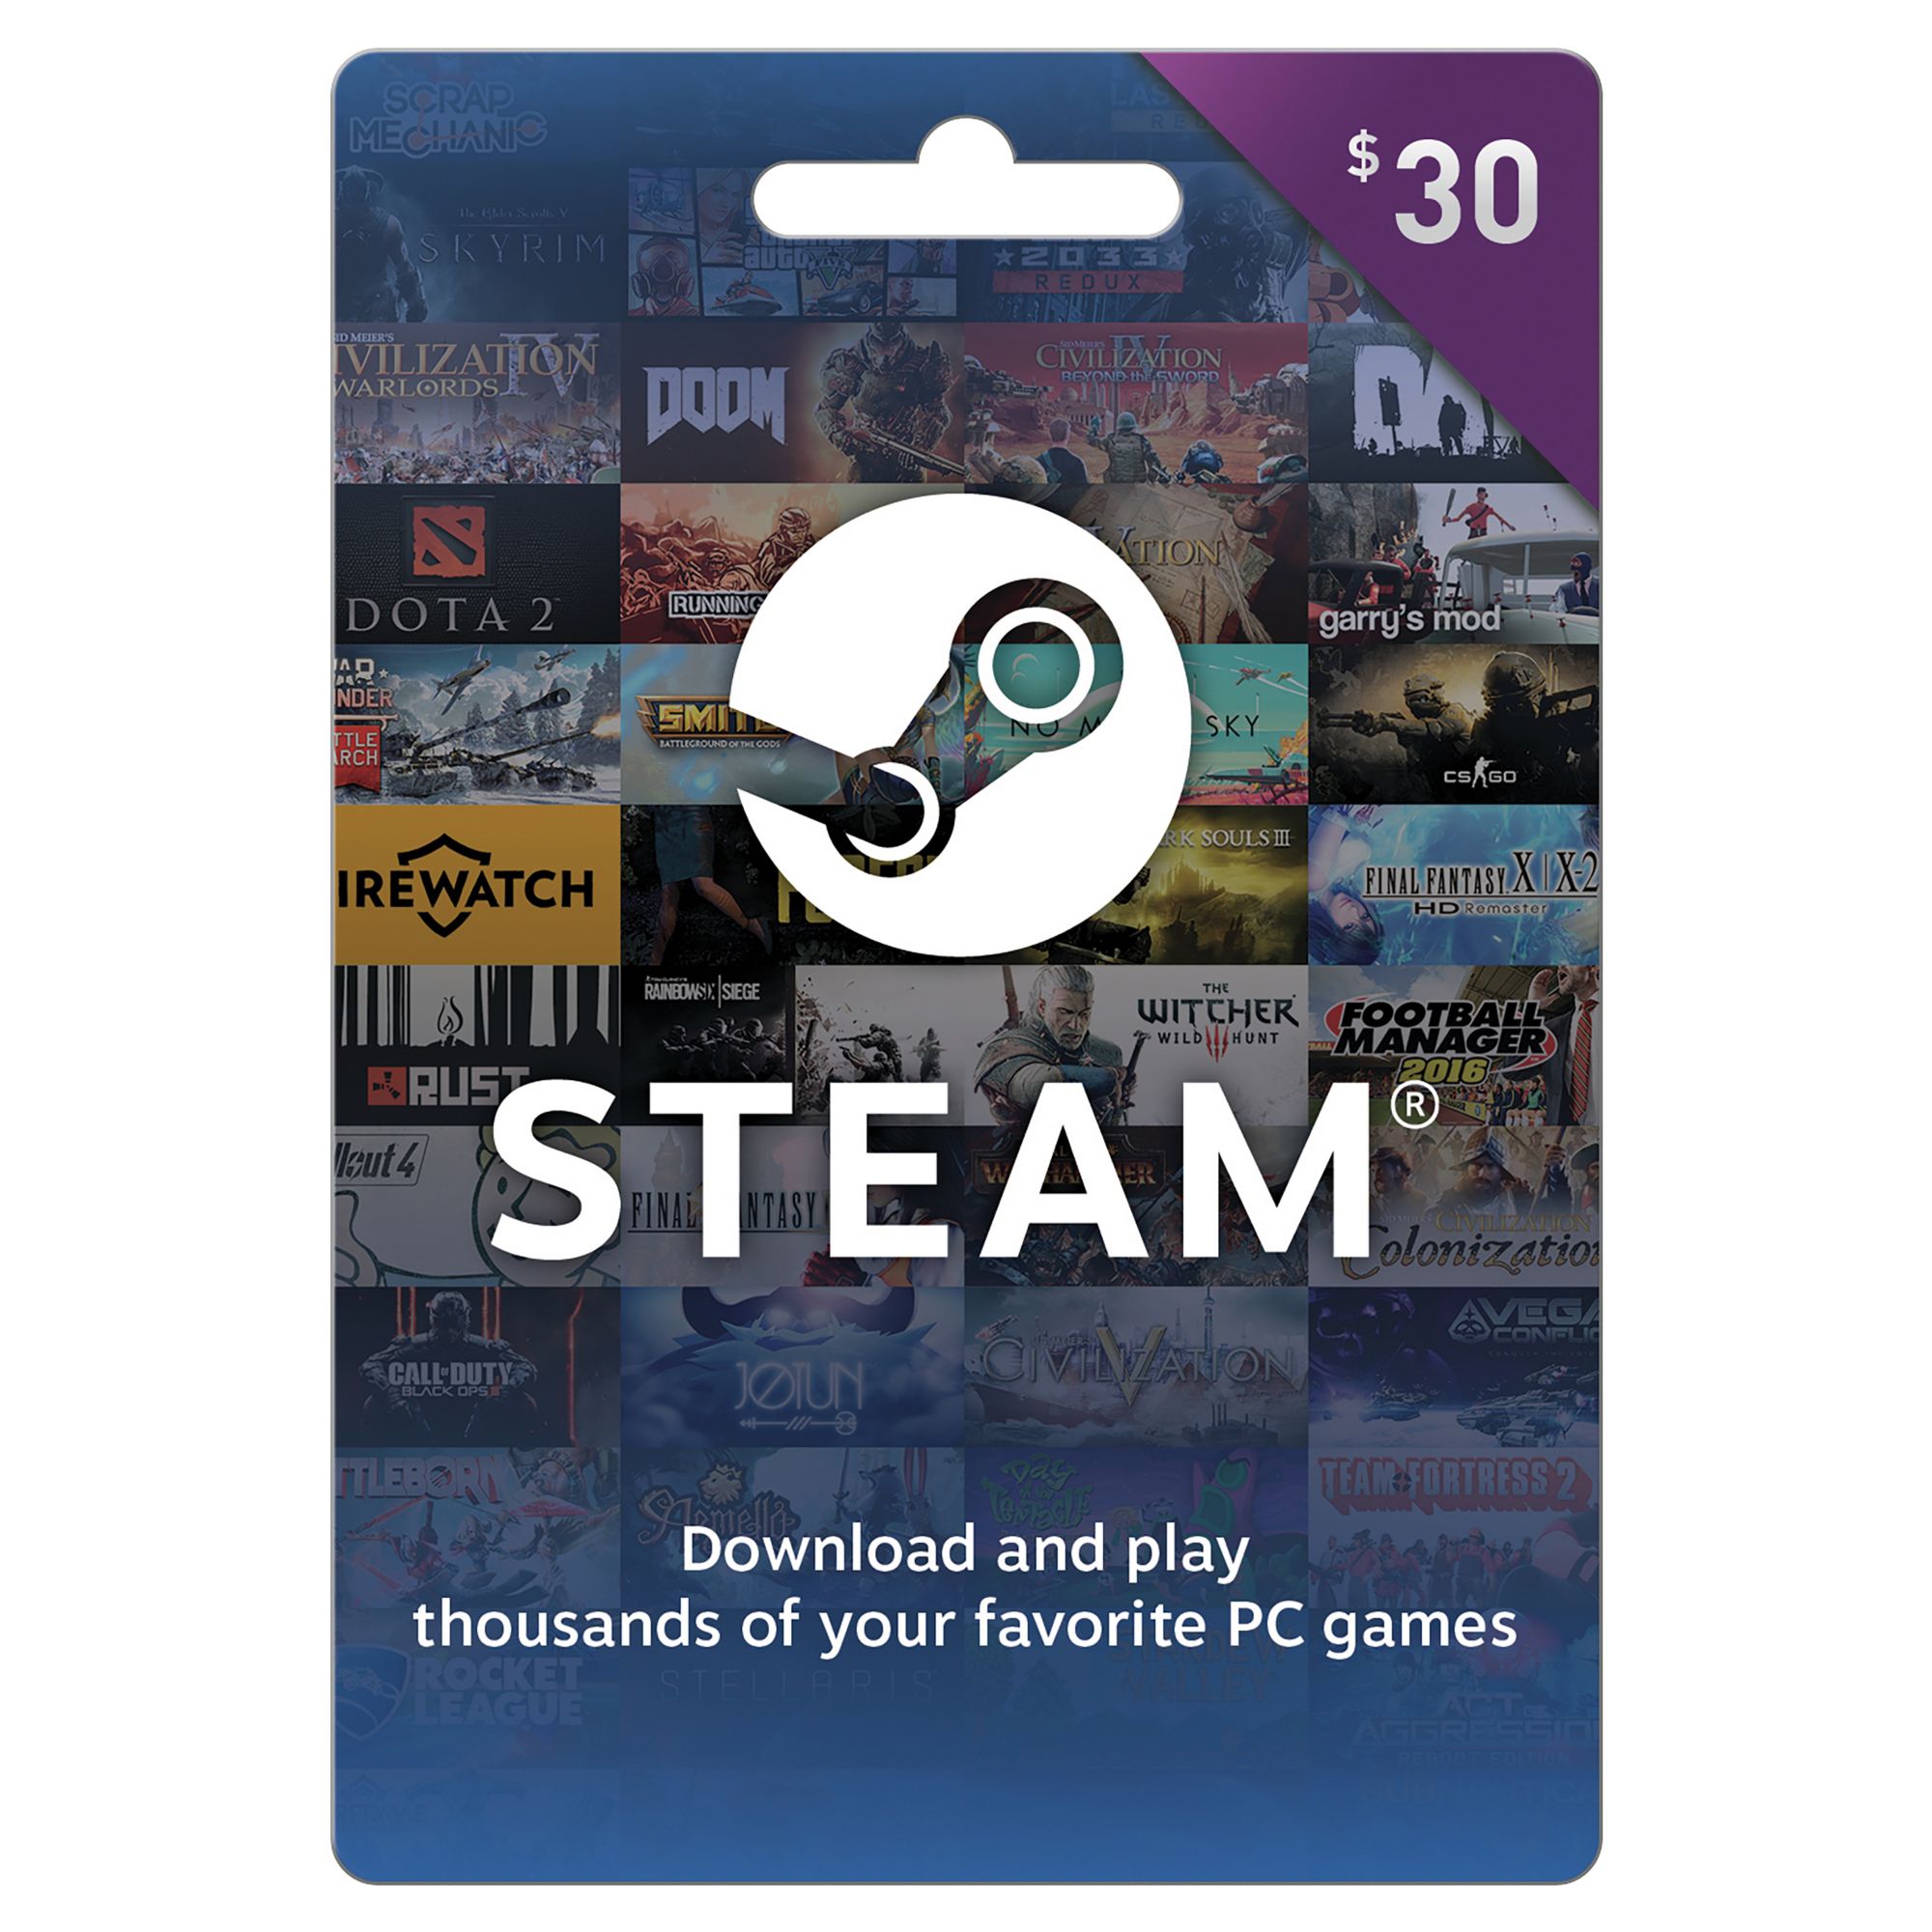 Gaming Gift Cards (Updated Prices!) Pay up to %30 With SteemBasicIncome  Shares! — Steemit